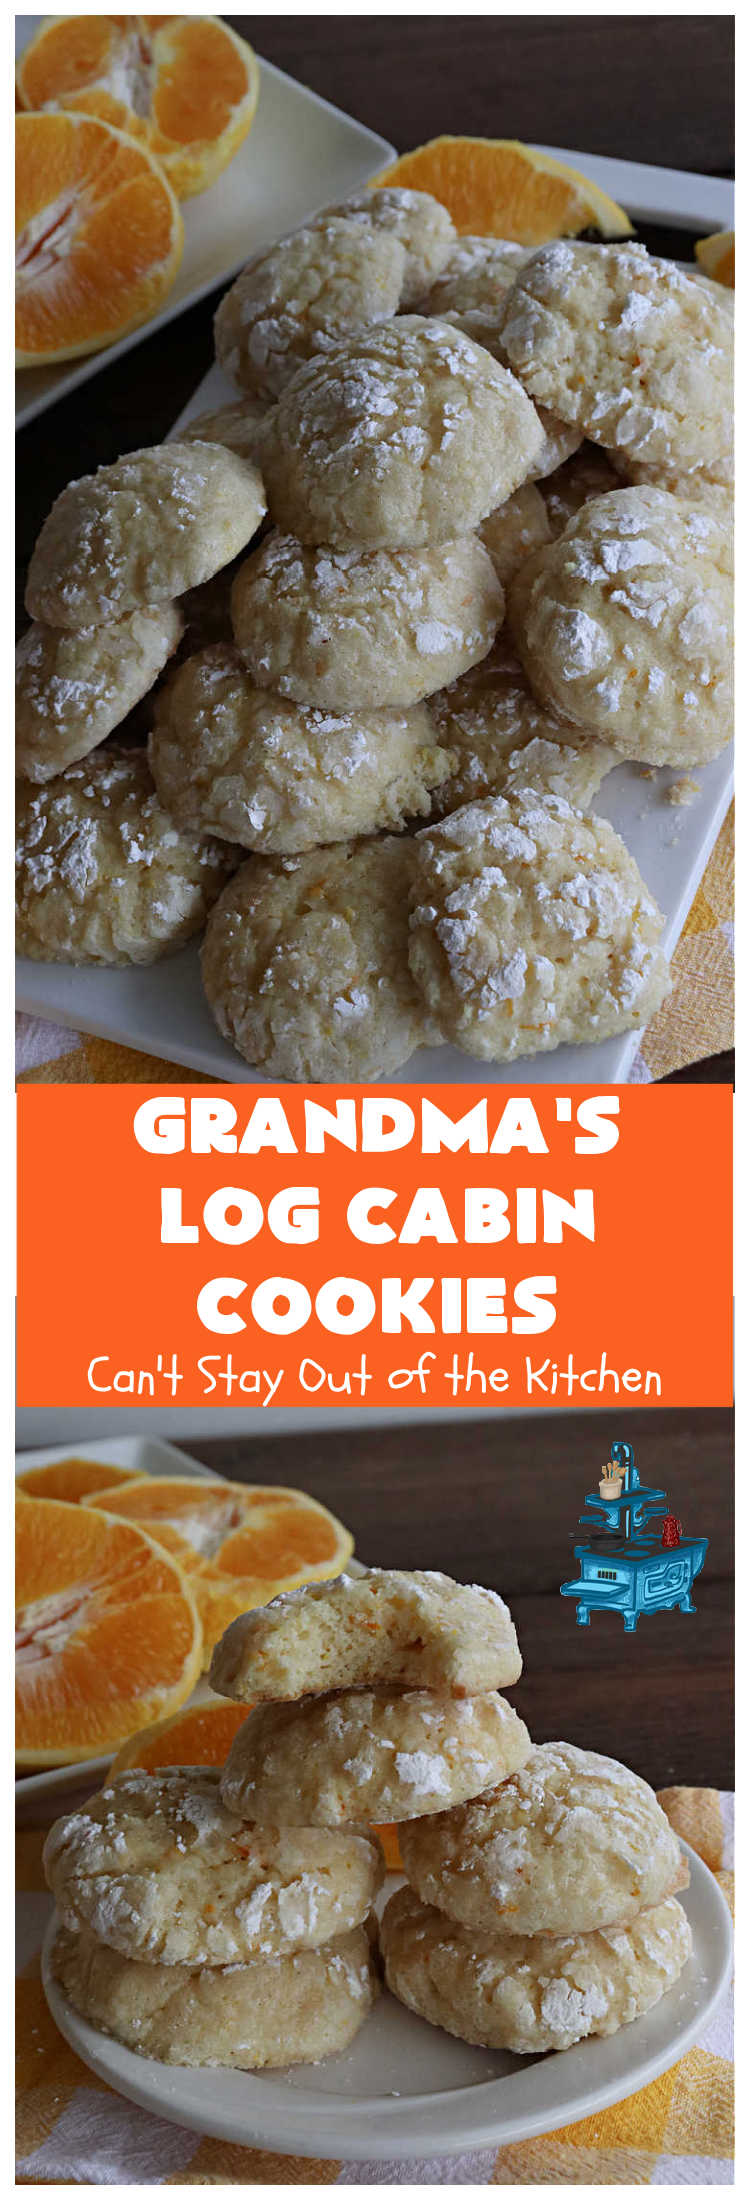 Grandma's Log Cabin Cookies | Can't Stay Out of the Kitchen | Cure your sweet tooth cravings with this vintage #cookie #recipe. It tastes like a #ShortbreadCookie since it's soft and puffy in texture. It's filled with #OrangeZest & #LemonJuice & absolutely delightful for #holiday #baking. Excellent for a #ChristmasCookieExchange, #tailgating or #Christmas parties, & sharing with family & friends. #dessert #HolidayDessert #OrangeDessert #LogCabinCookies #GrandmasLogCabinCookies 